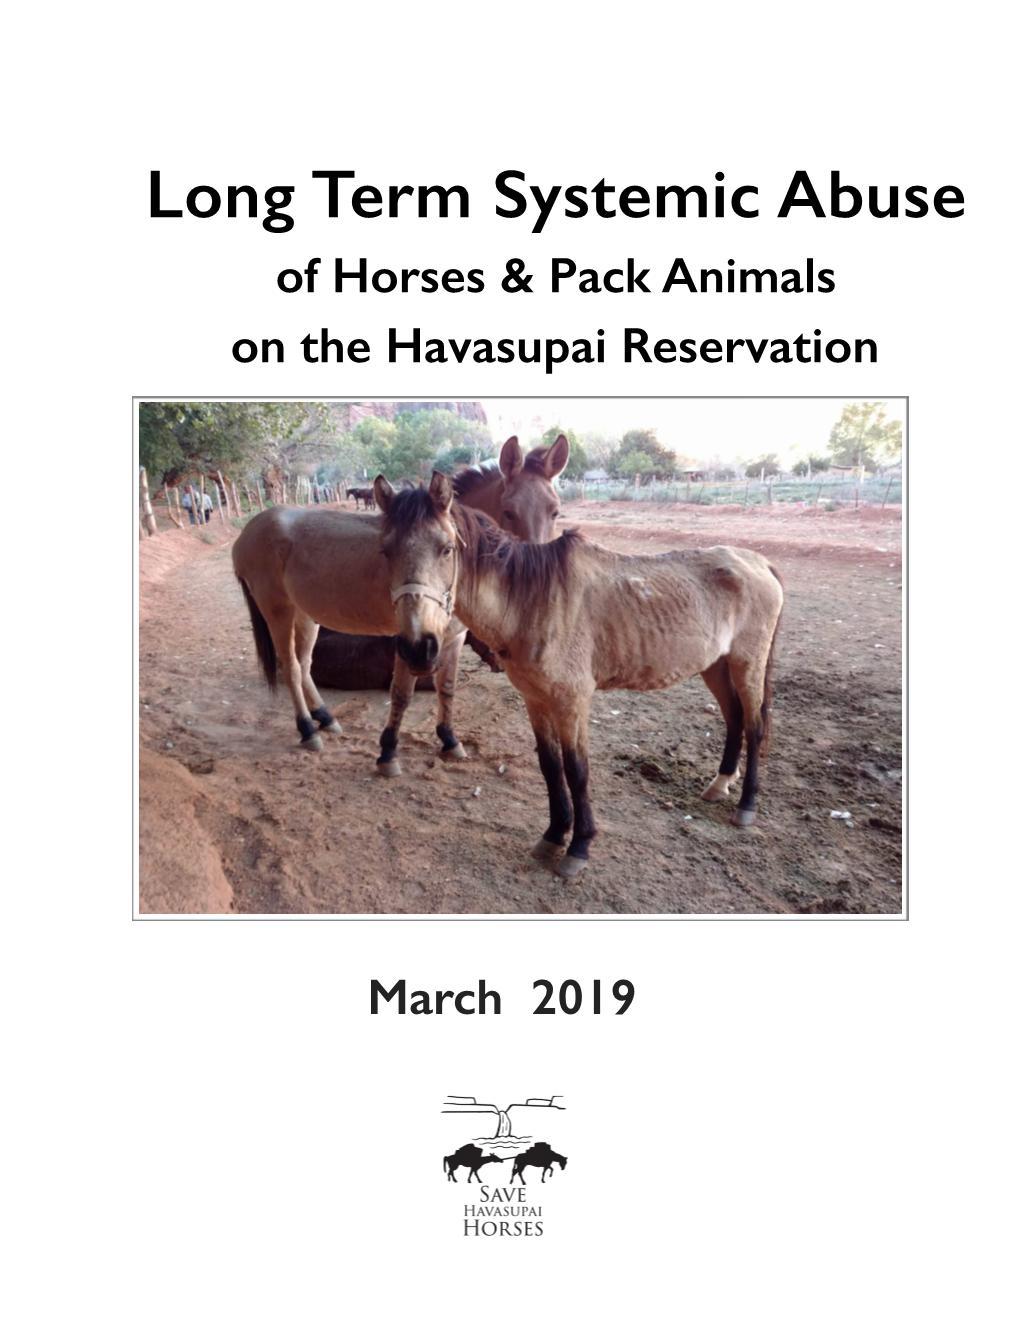 Long Term Systemic Abuse of Horses and Pack Animals